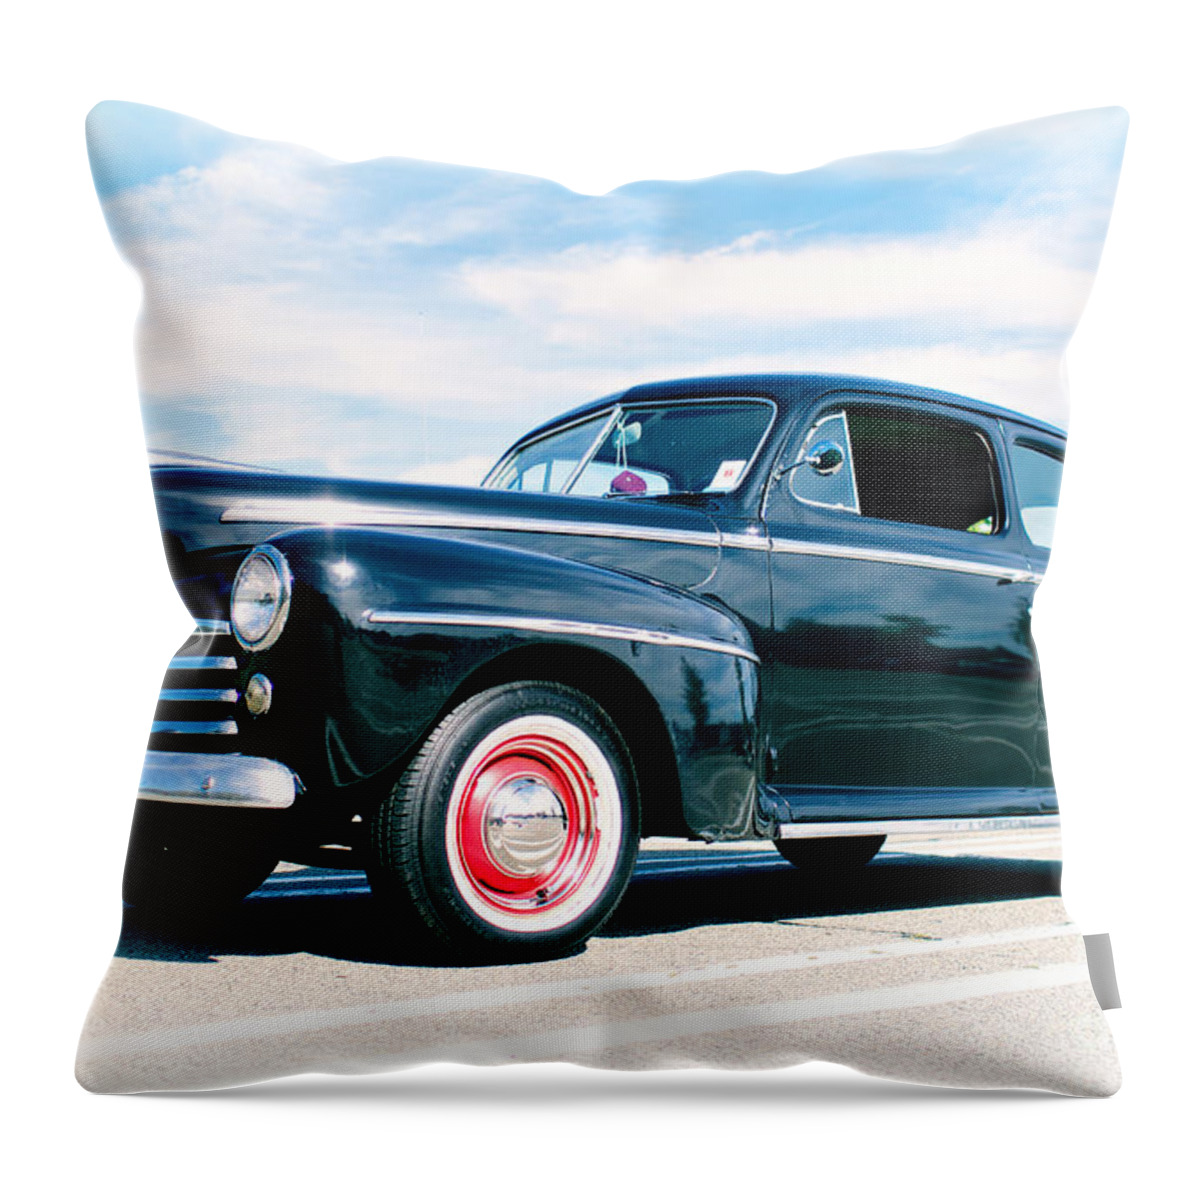 Ford Throw Pillow featuring the photograph 1948 Ford 2 Door Sedan by Mark Miller